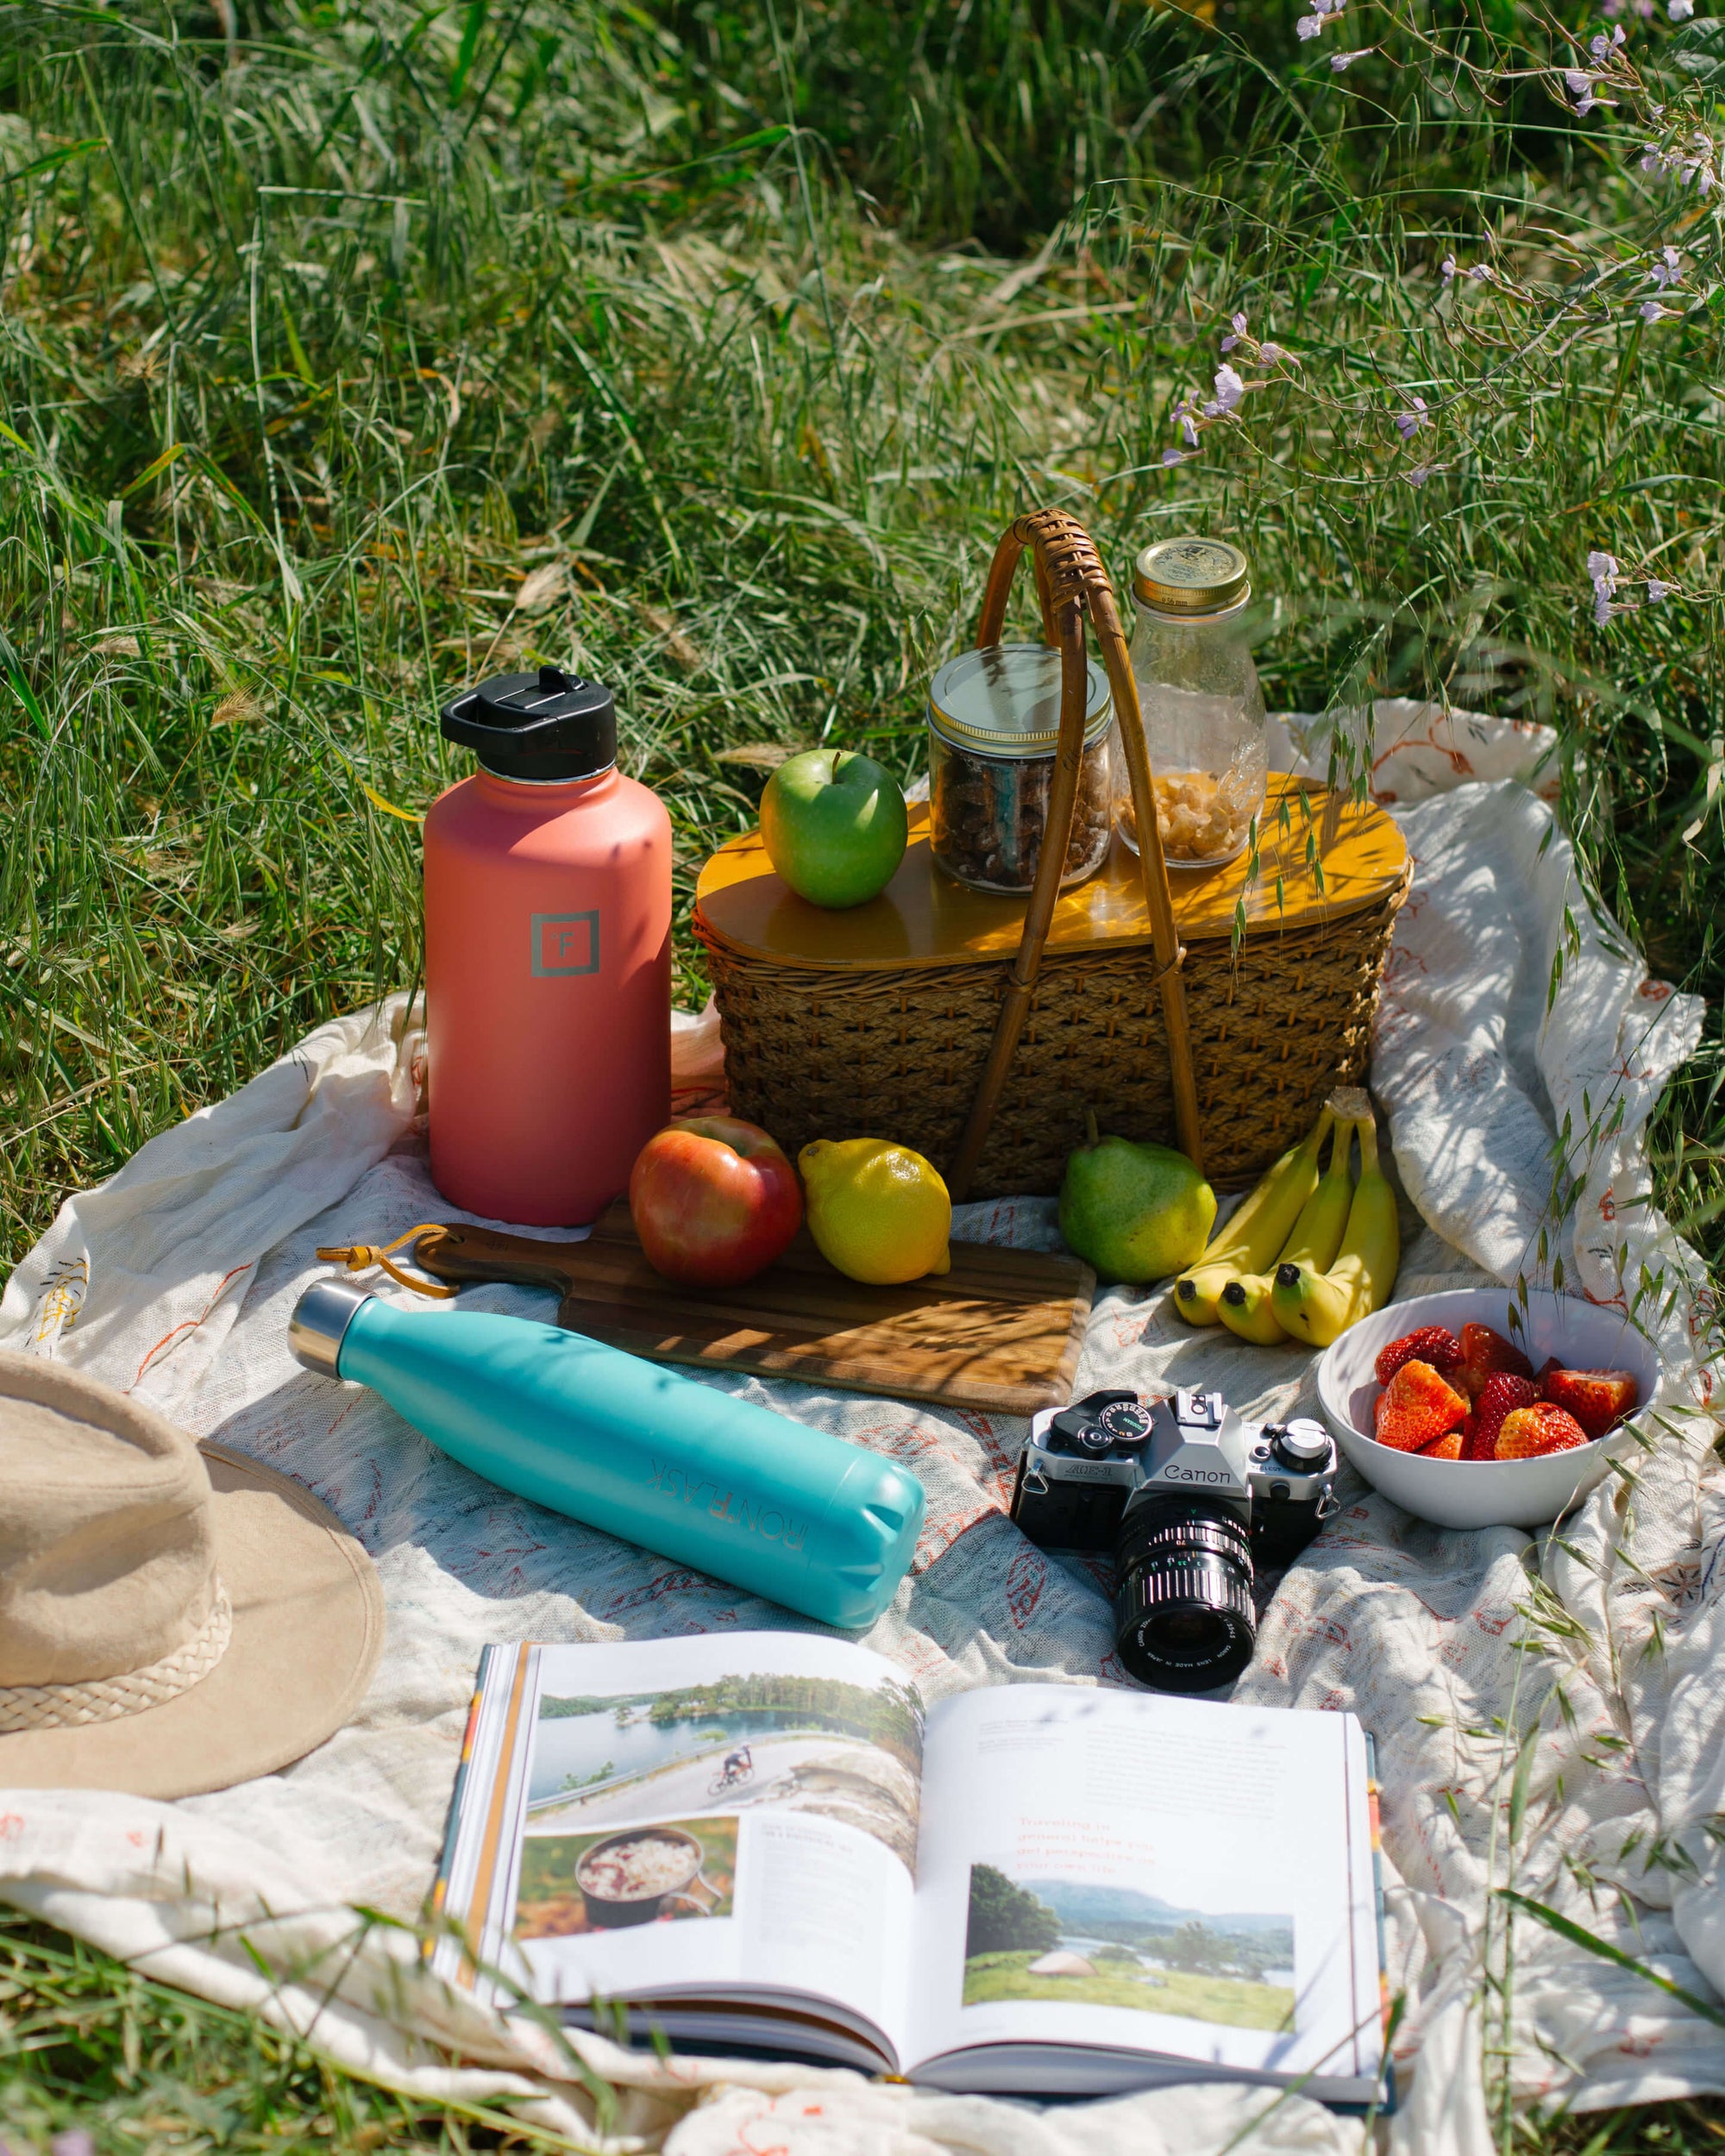 I. The Importance of Planning a Picnic